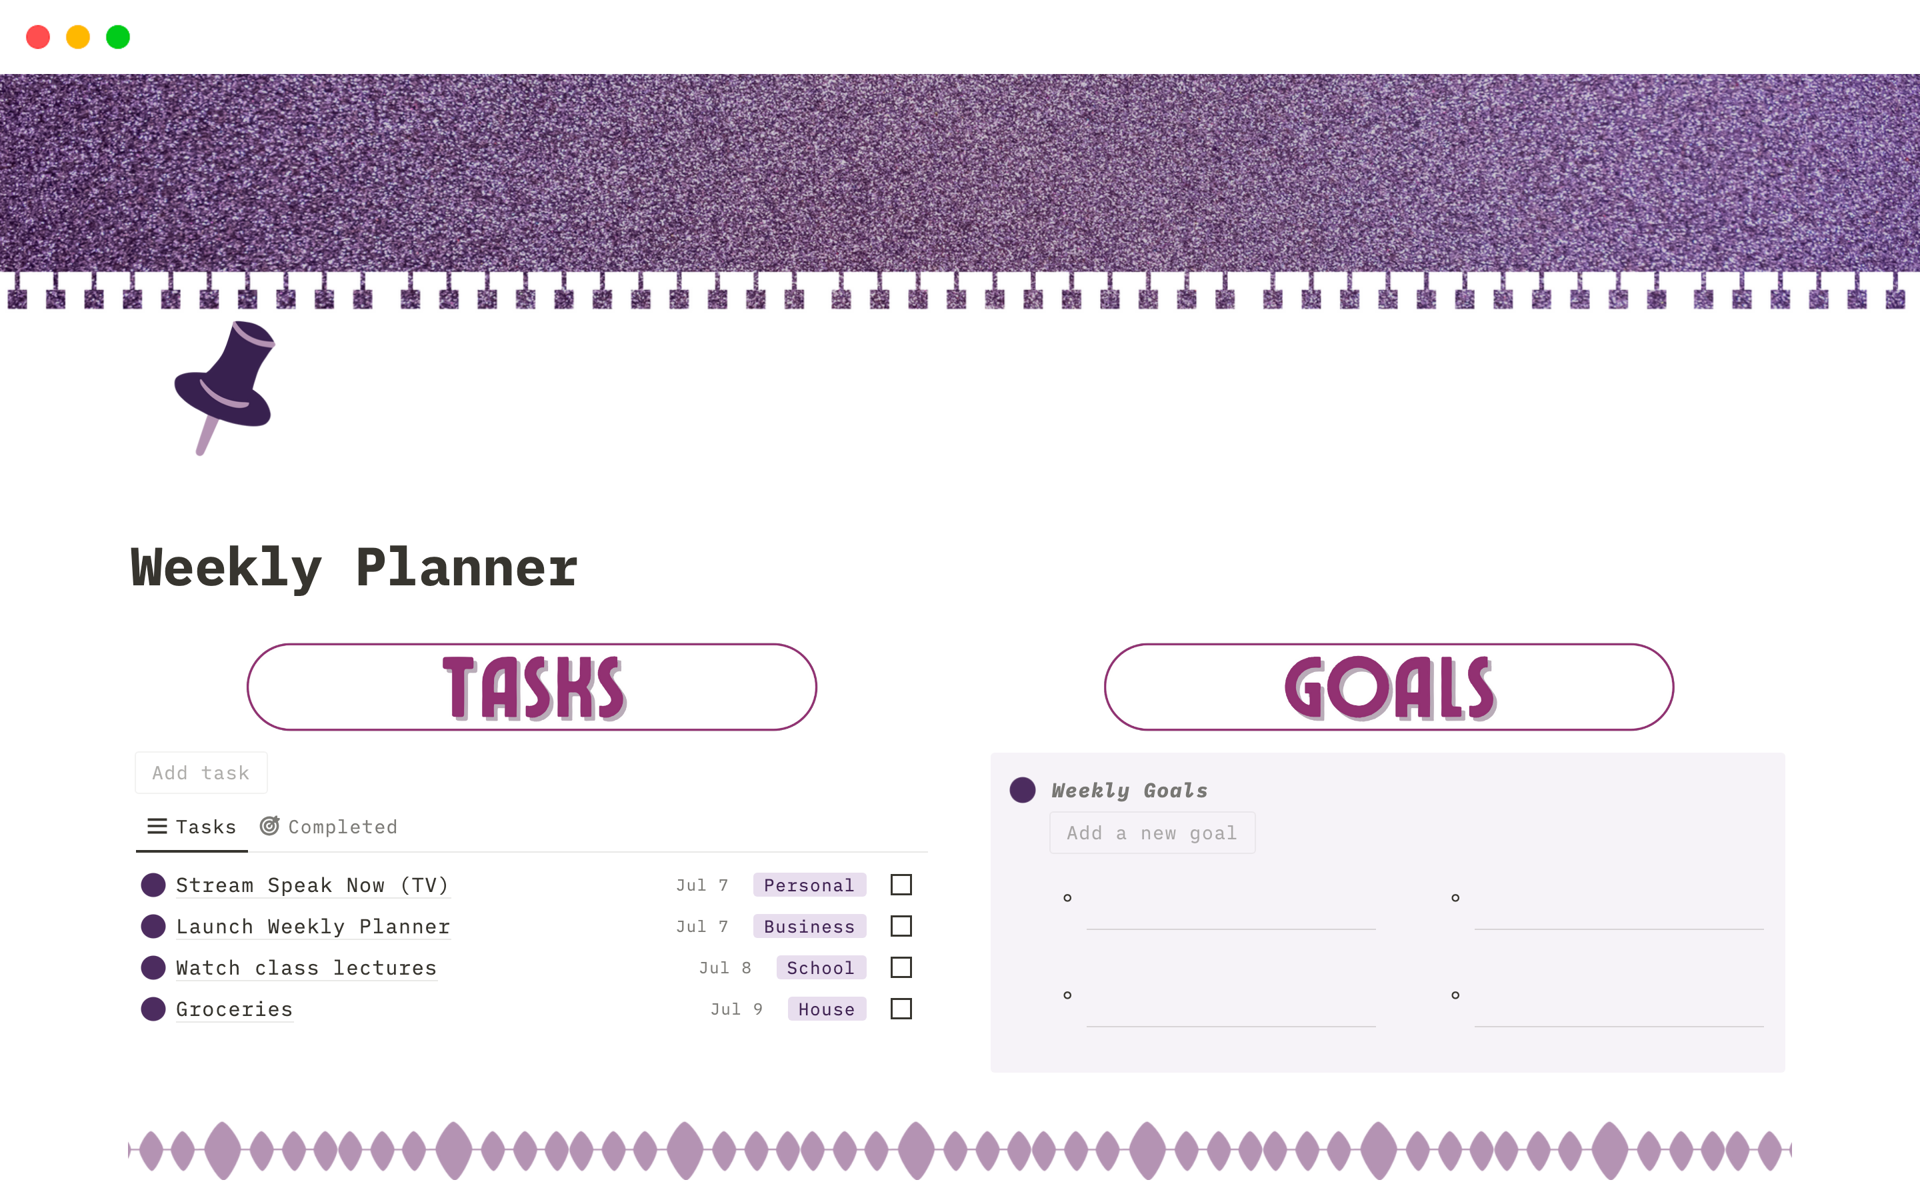 Inspired by the Speak Now album and designed with productivity in mind, the Notion Weekly Planner is the ultimate tool to help you manage your time, tasks, and priorities effectively.